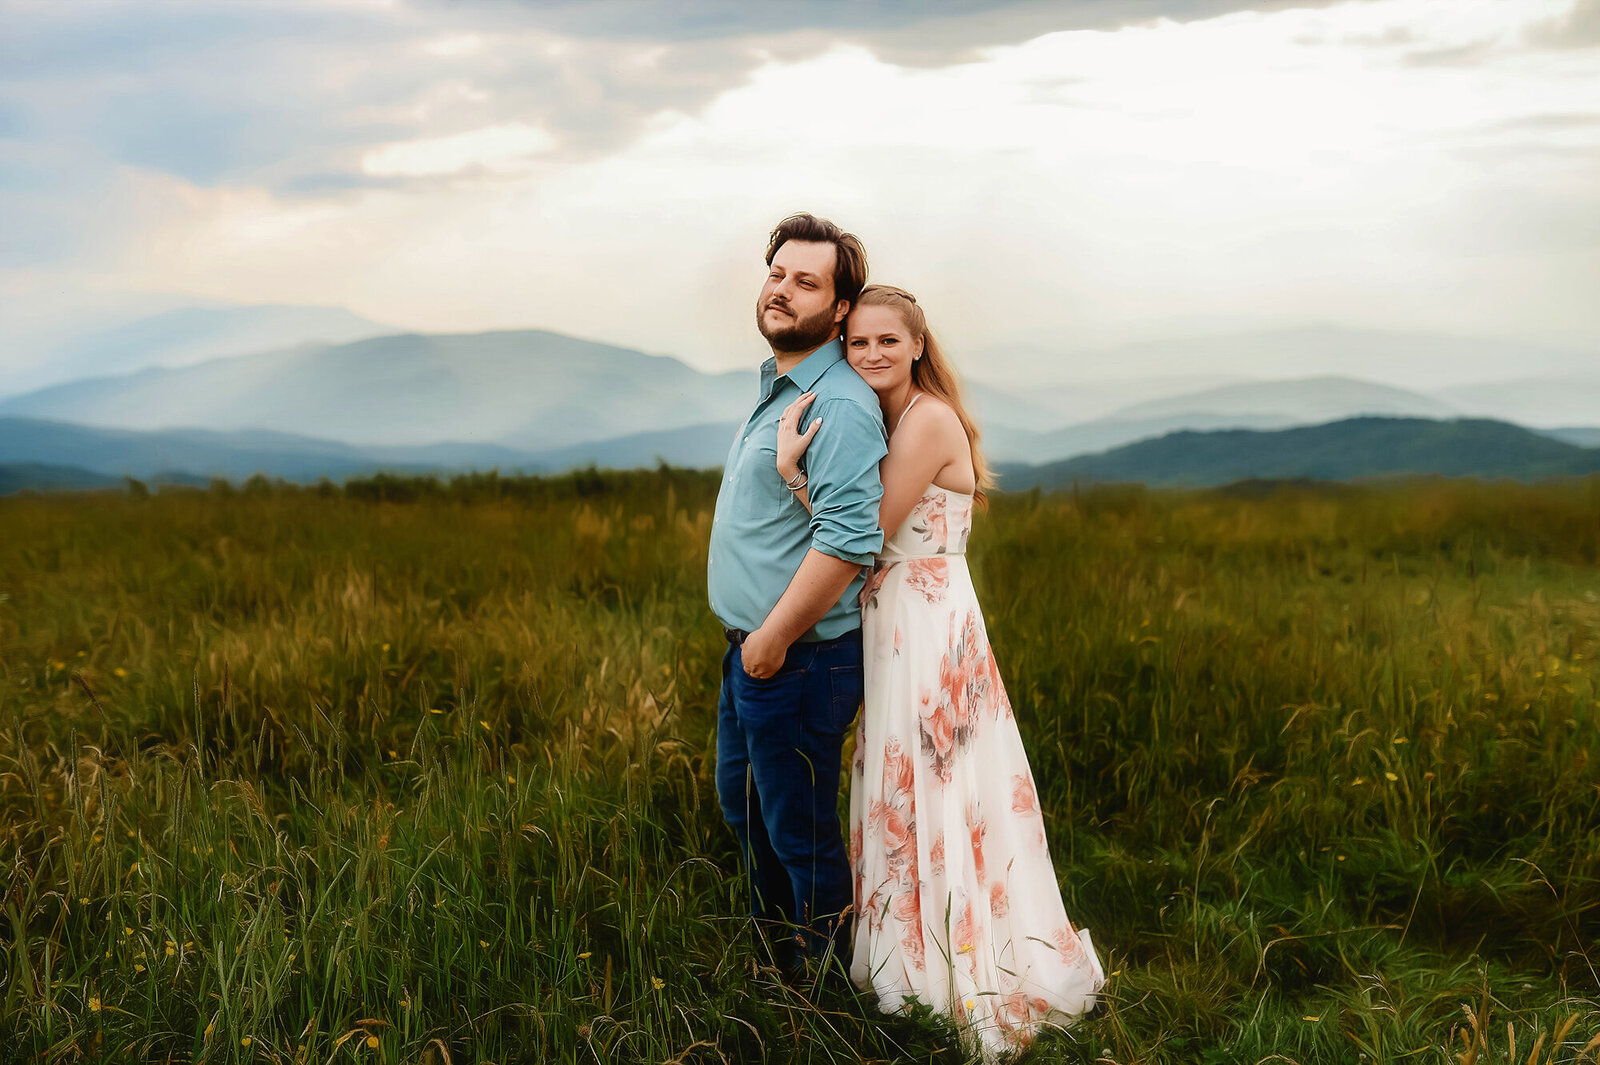 Engaged couple poses for Engagement Photos at Max Patch mountain near Asheville, NC.